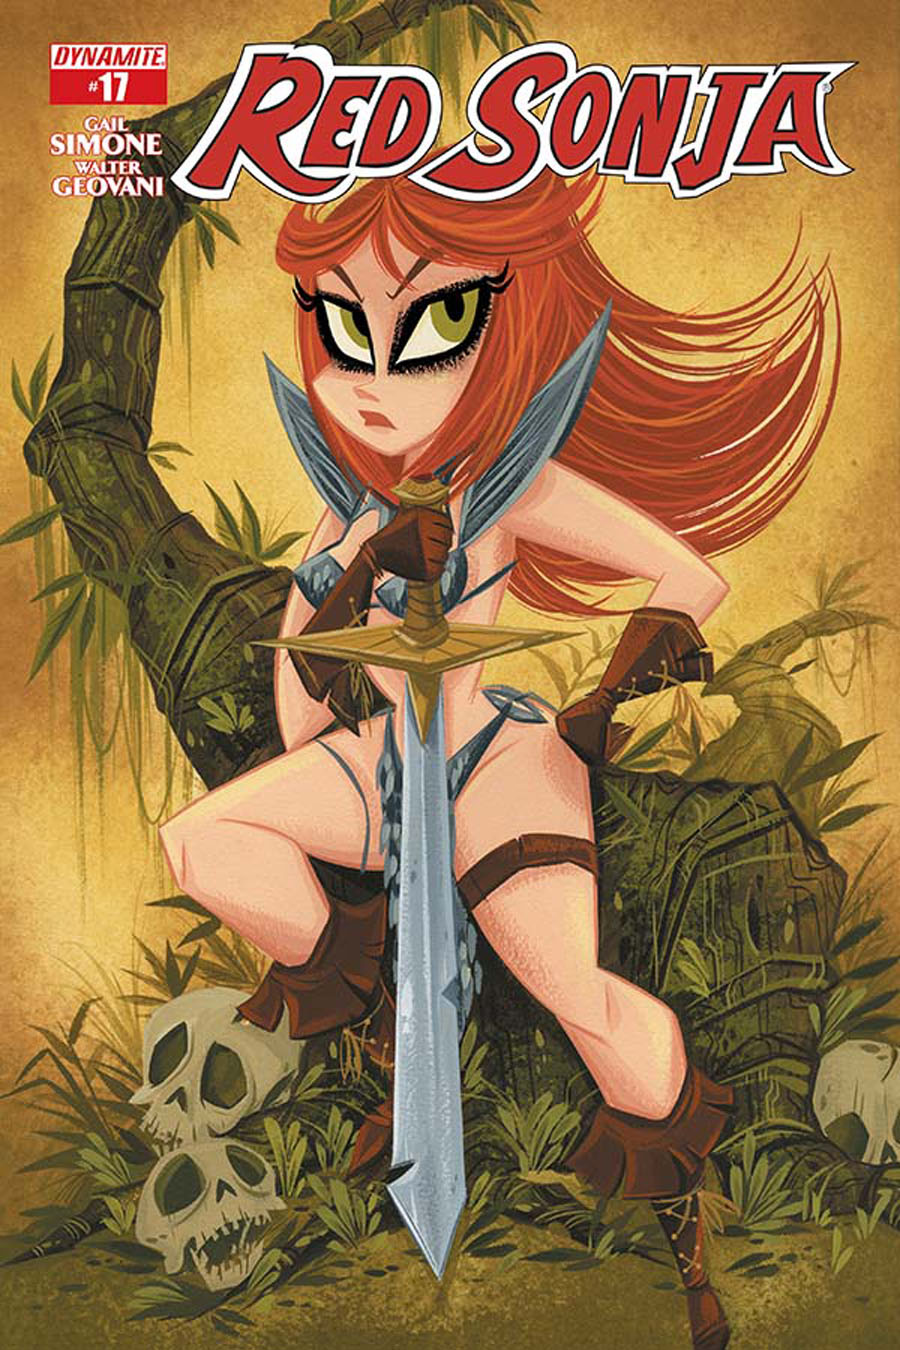 Red Sonja Vol 5 #17 Cover C Variant Stephanie Buscema Subscription Cover